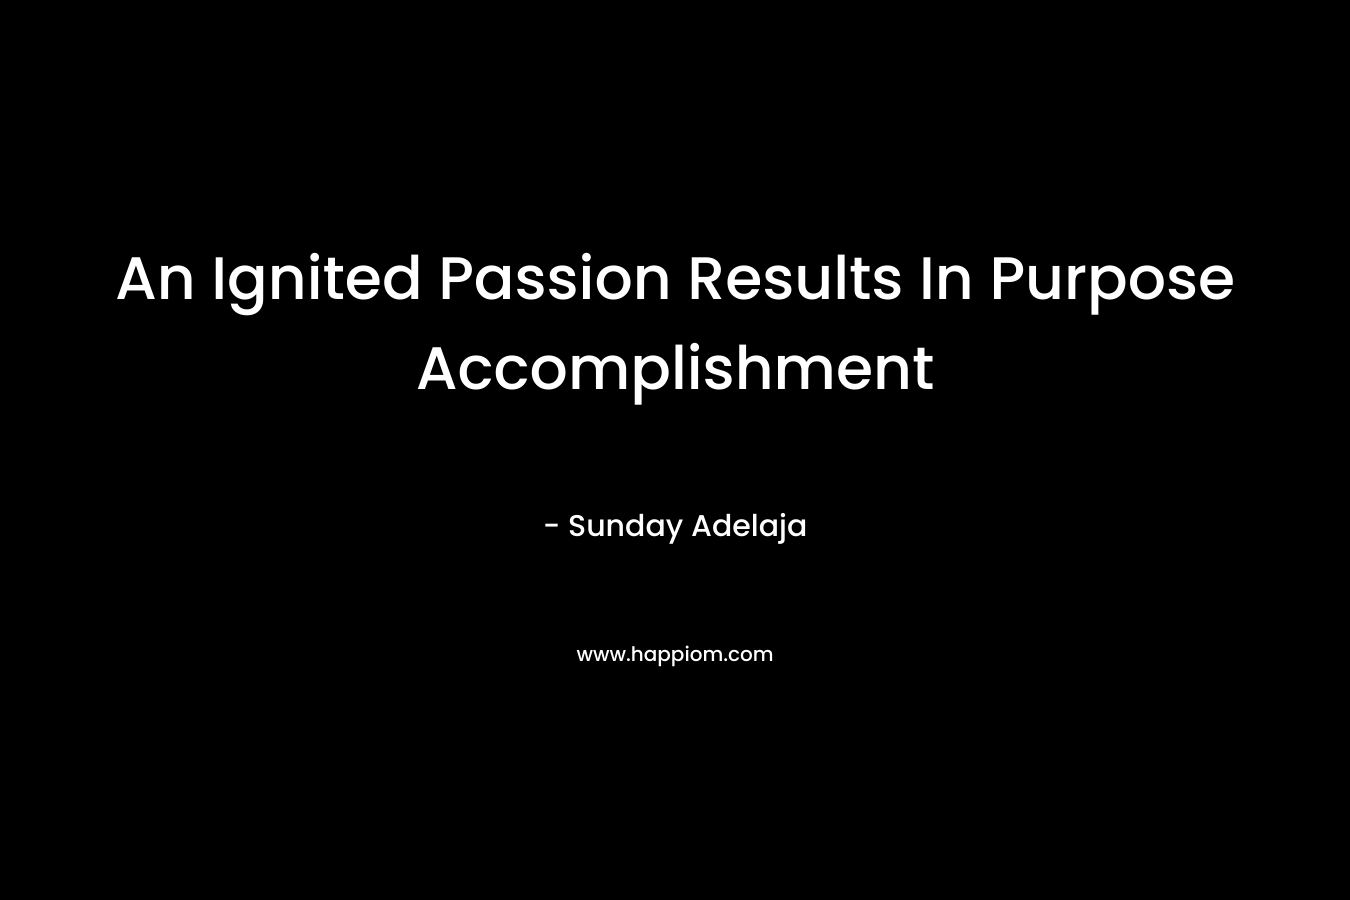 An Ignited Passion Results In Purpose Accomplishment